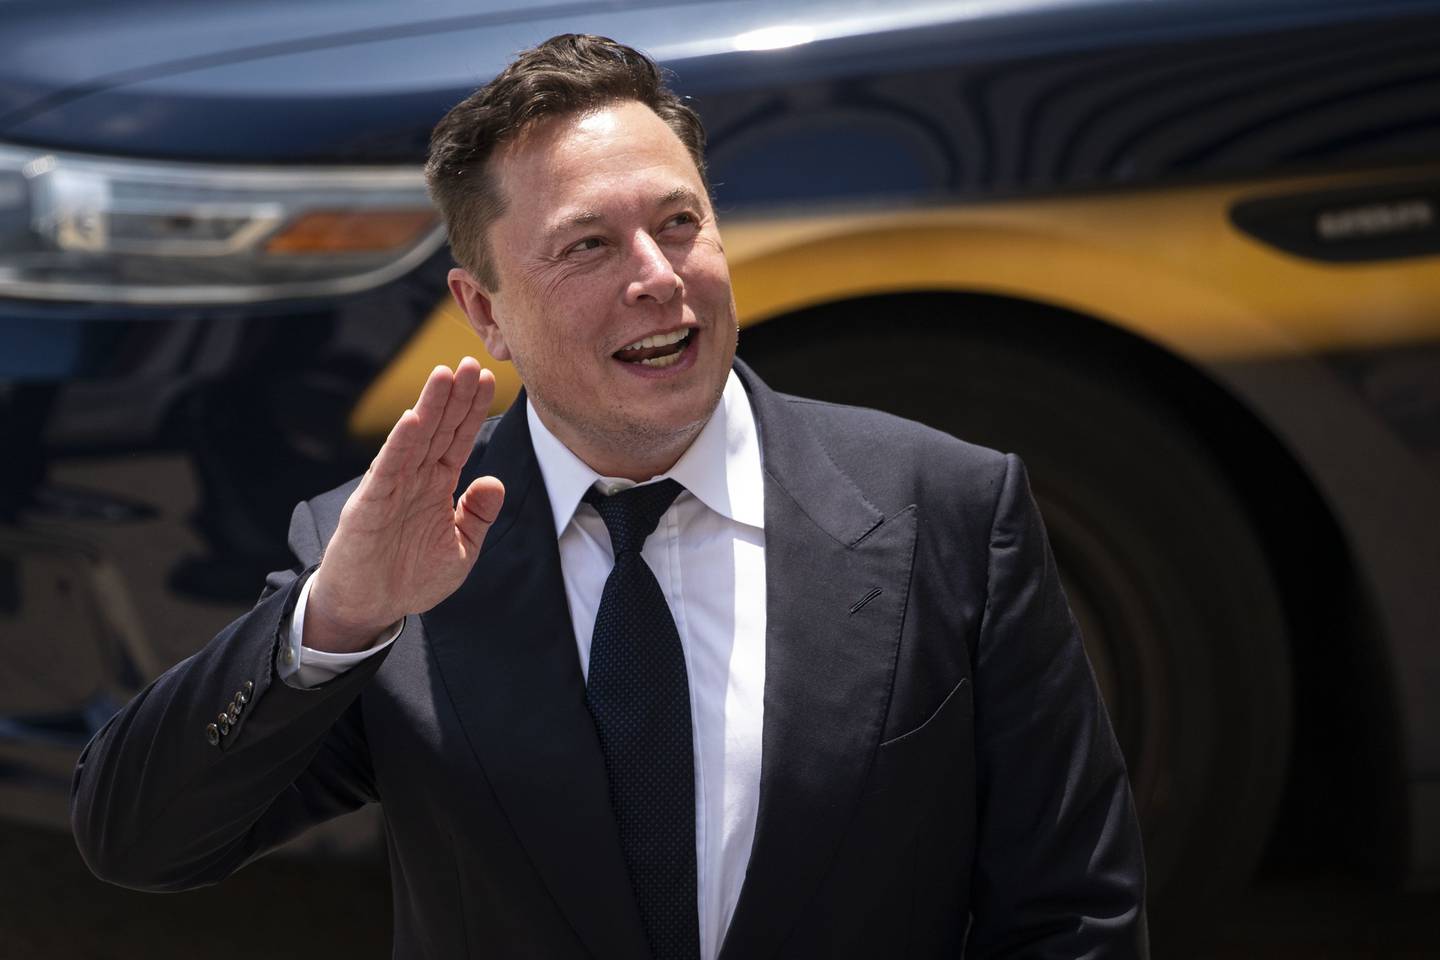 Elon Musk, chief executive officer of Tesla Inc., waves while departing court during the SolarCity trial in Wilmington, Delaware, U.S., on Tuesday, July 13, 2021. Photographer: Al Drago/Bloomberg